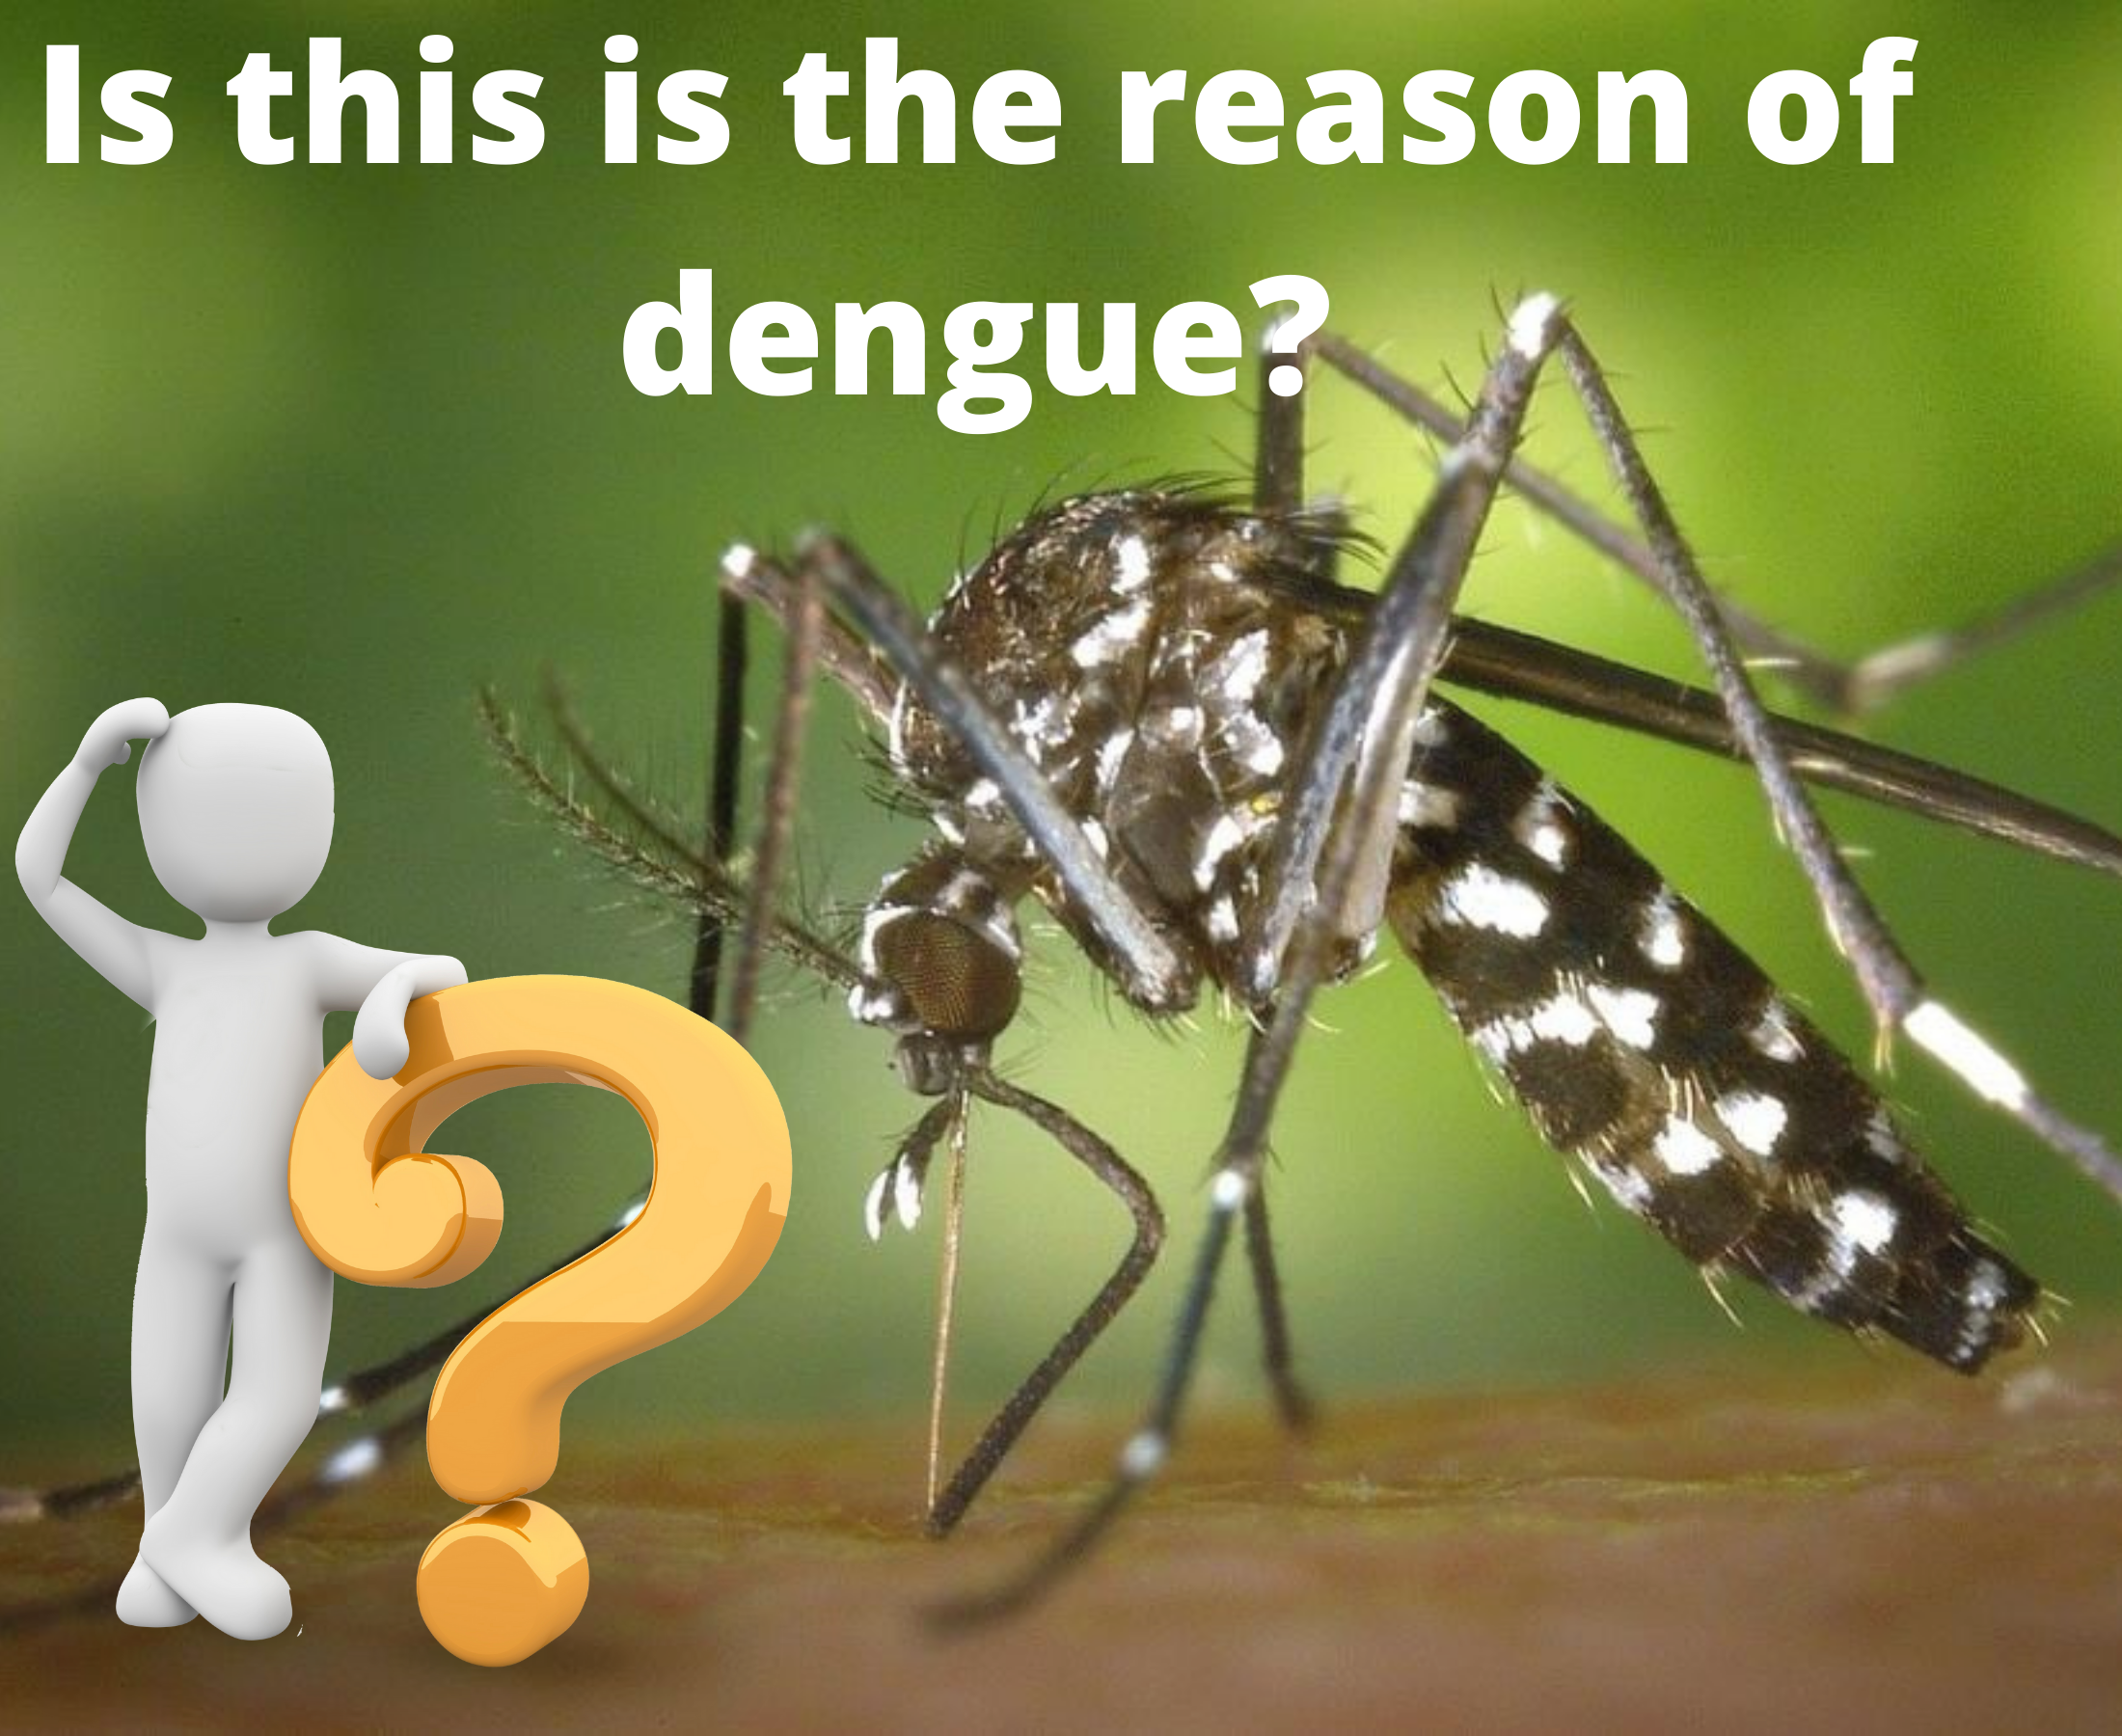 Whether the dengue is spread by a male or female mosquito?